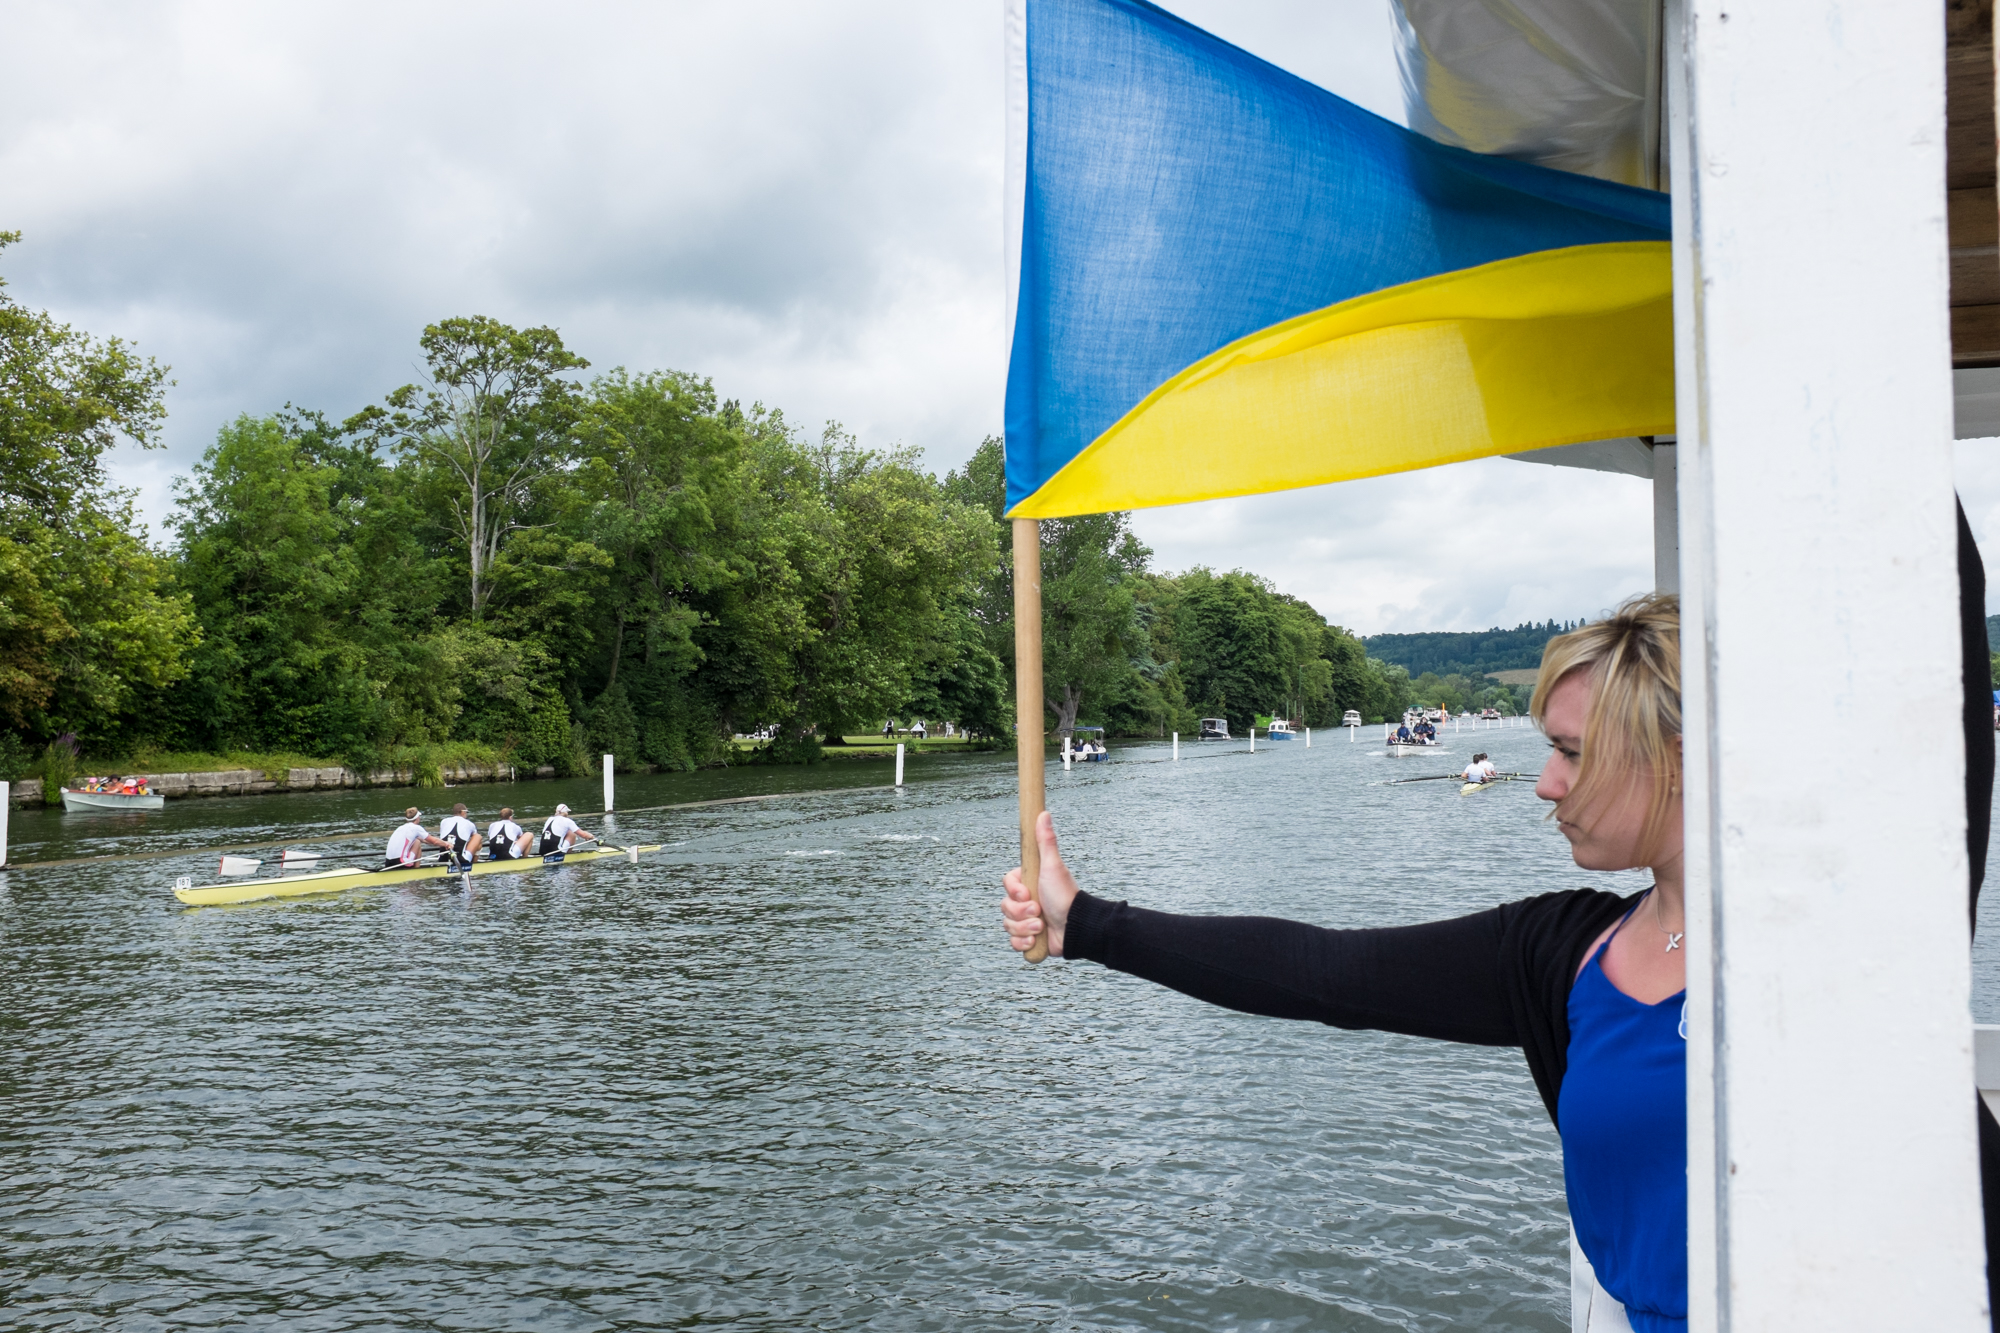  A signaller at Henley Royal Regatta drops a timing flag during a race as the leading crew passes the 1-mile point. A timekeeper on the umpire's launch following will make a note of the split time, and announce it to the crowds in the grandstands. 